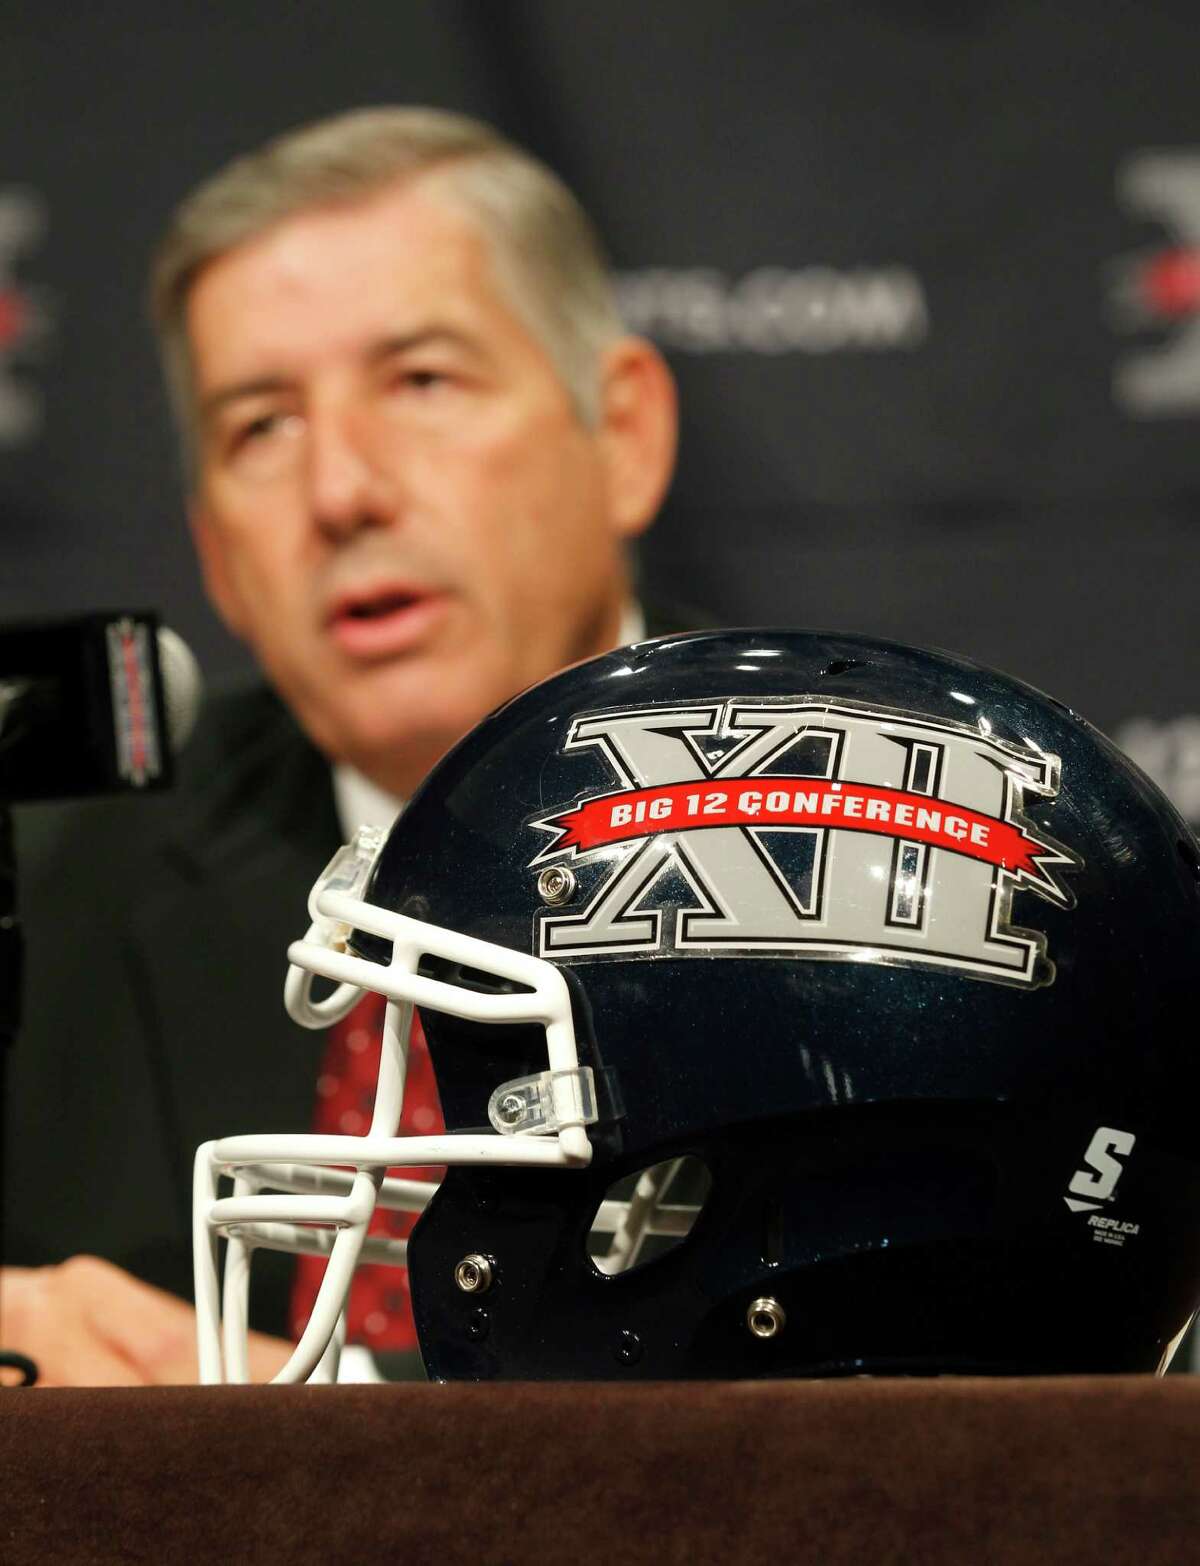 Big 12 Conference Commissioner Bob Bowlsby addresses the media at the beginning of the Big 12 Conference Football Media Days, Monday, July 22, 2013 in Dallas. (AP Photo/Tim Sharp)